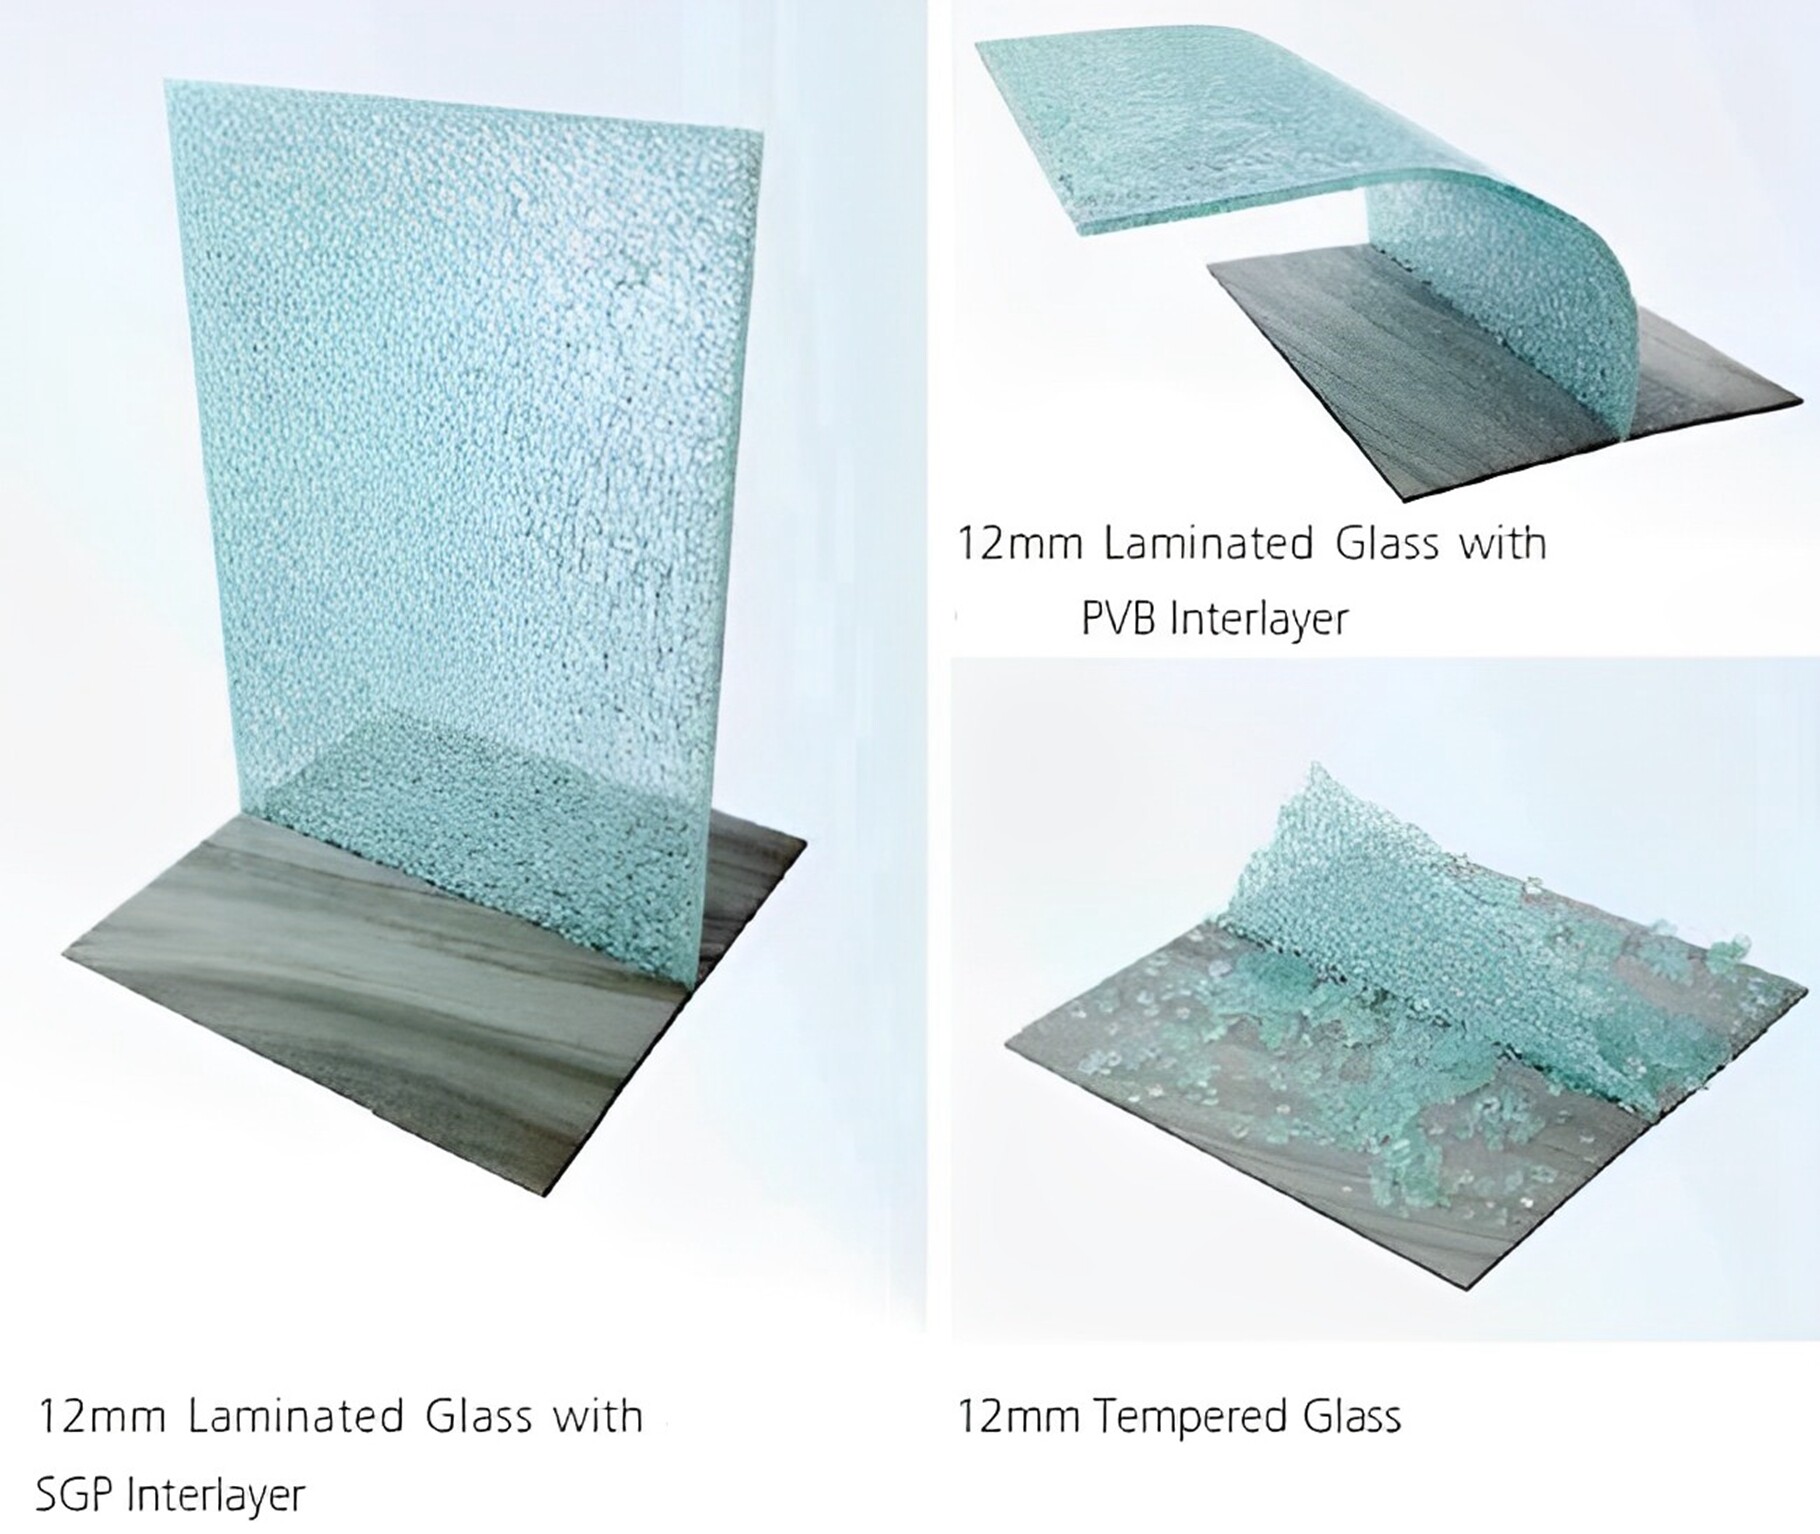 tempered glass vs laminated glass test